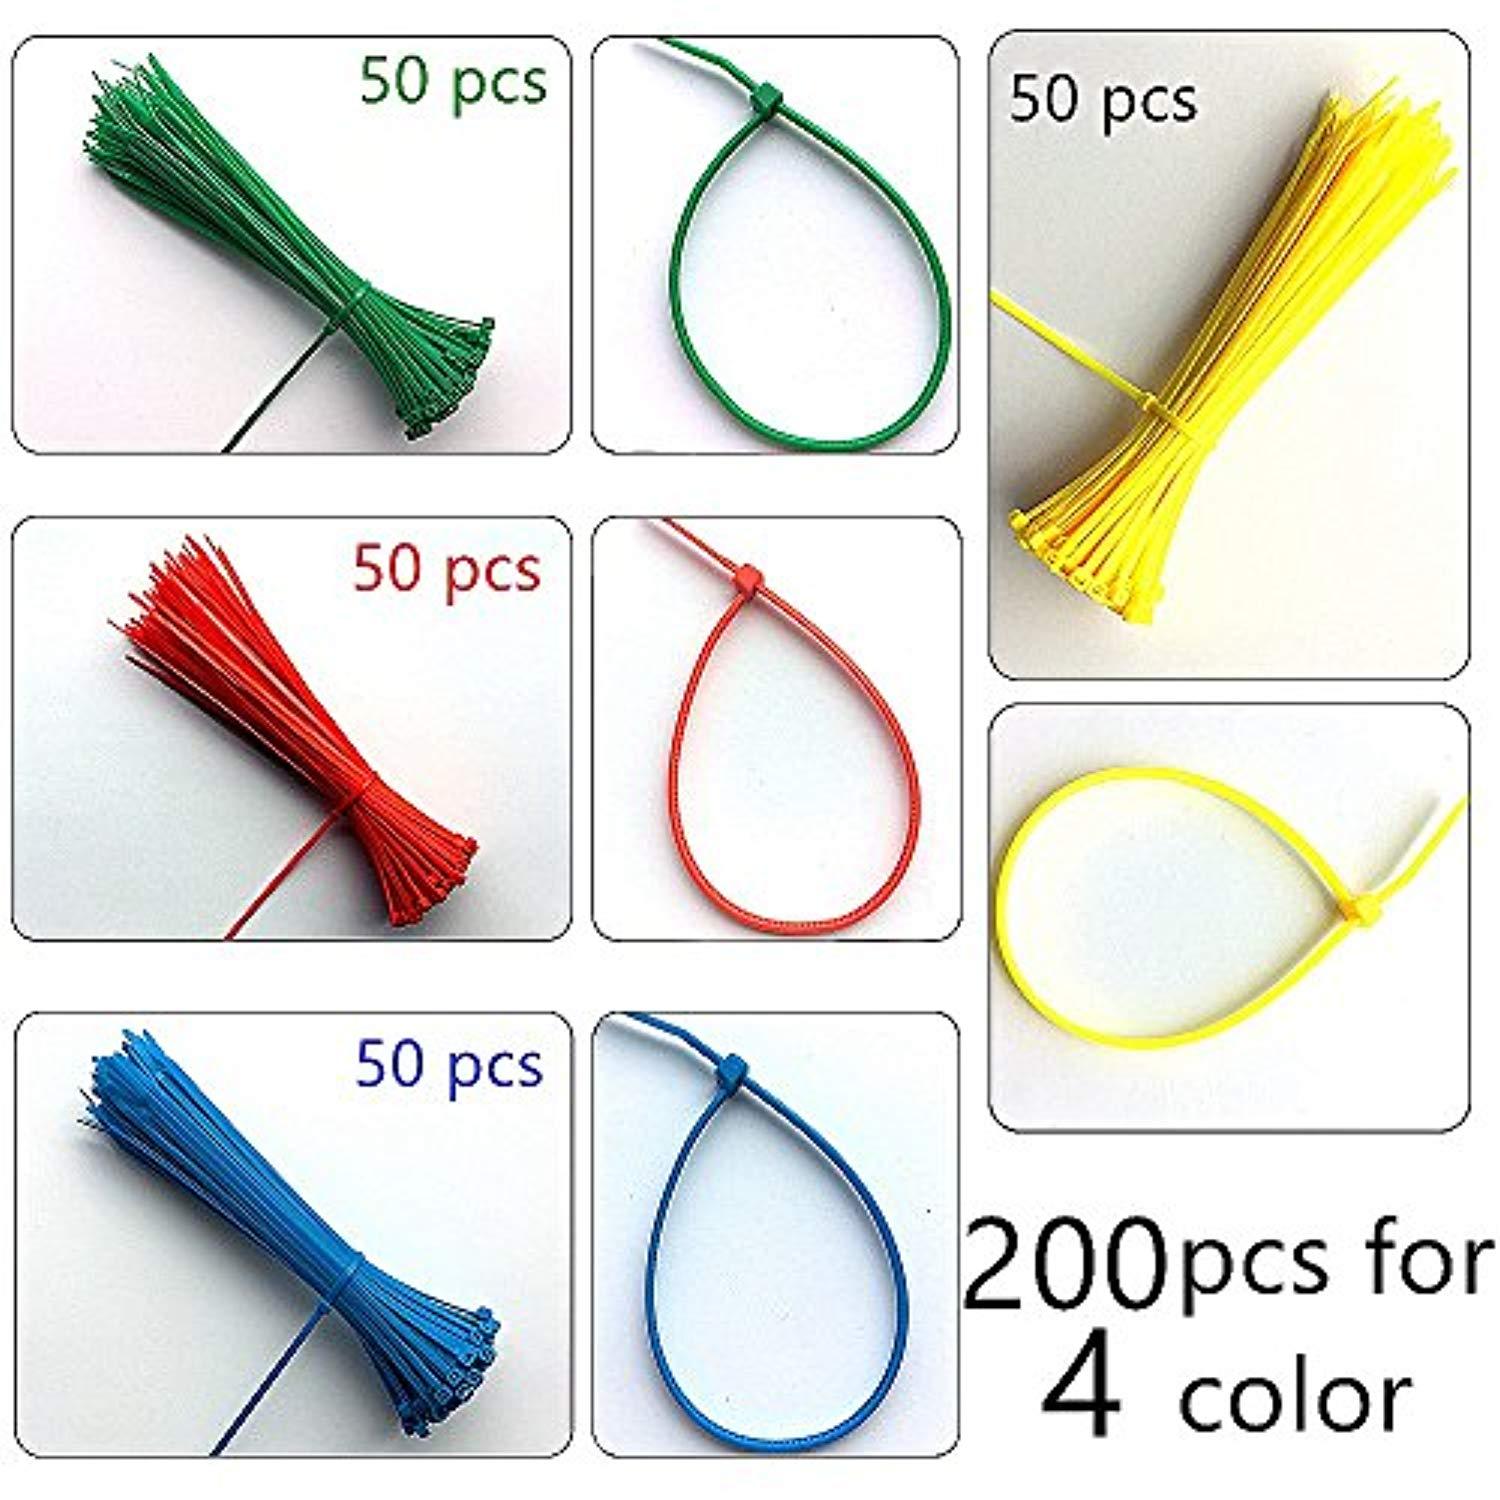 Bosonshop 650 pc Nylon Zip Ties Cable Wire Ties Adjustable Self-Locking Multi-Color for Home, Outdoor, Office